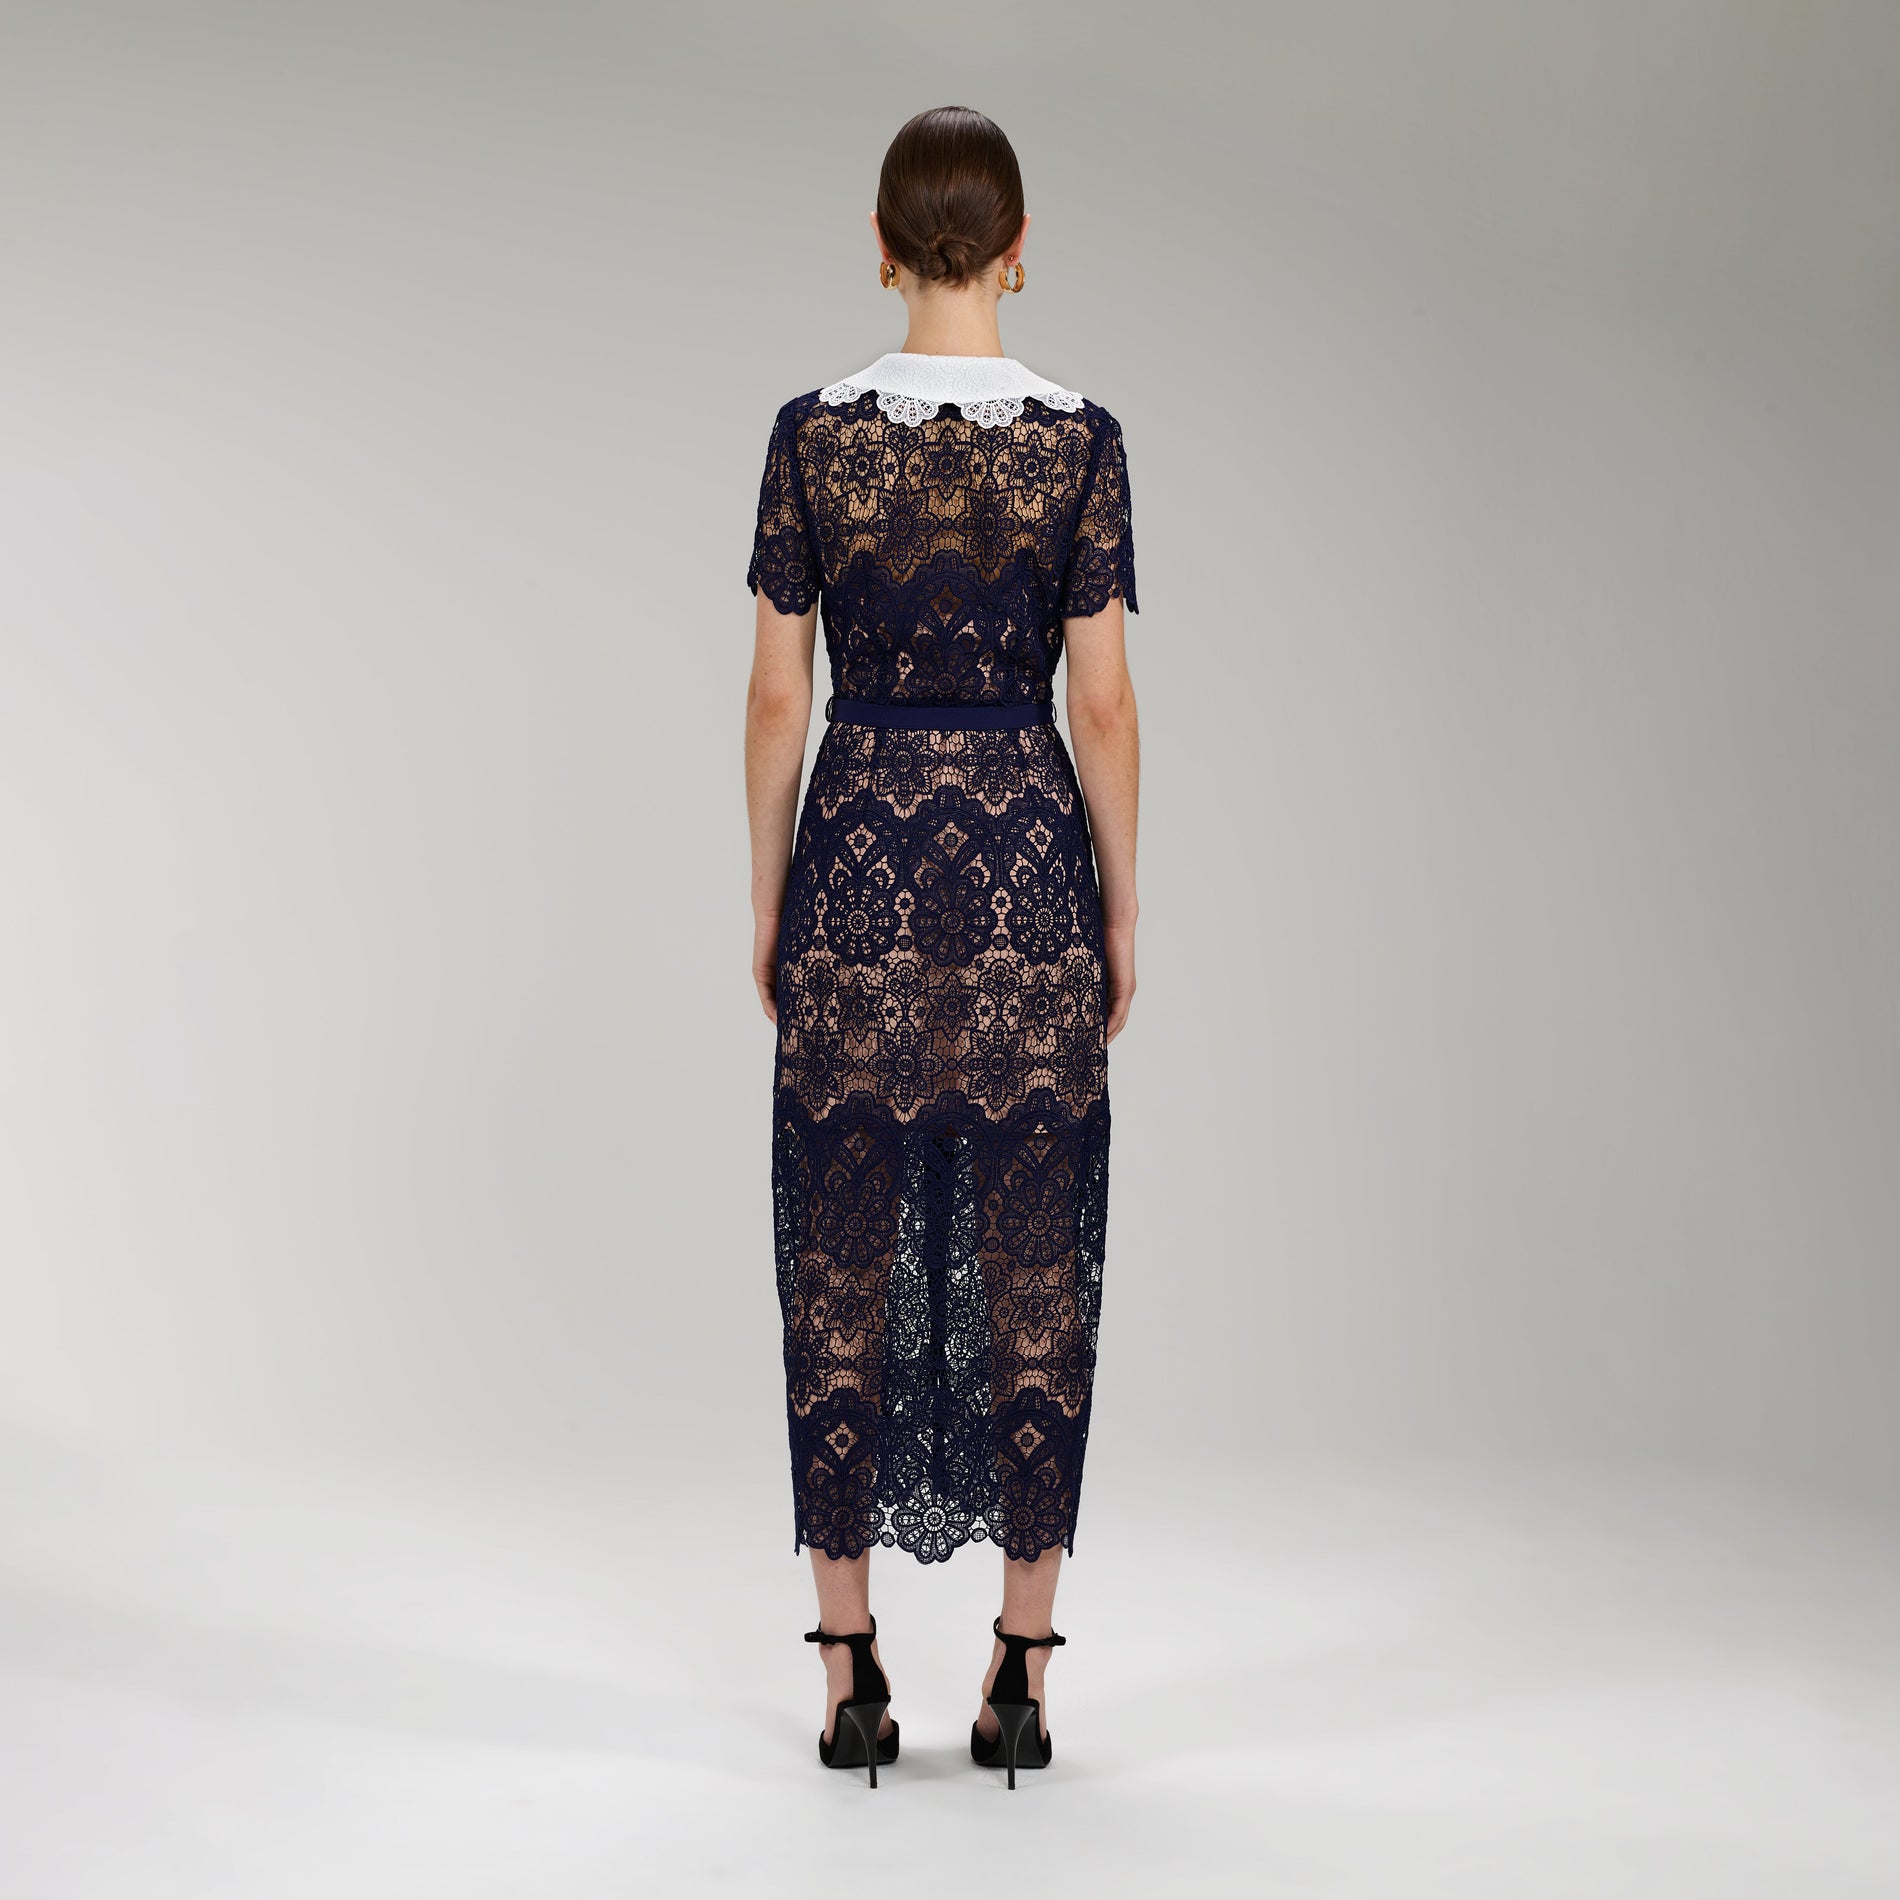 A woman wearing the Navy Floral Guipure Midi Dress